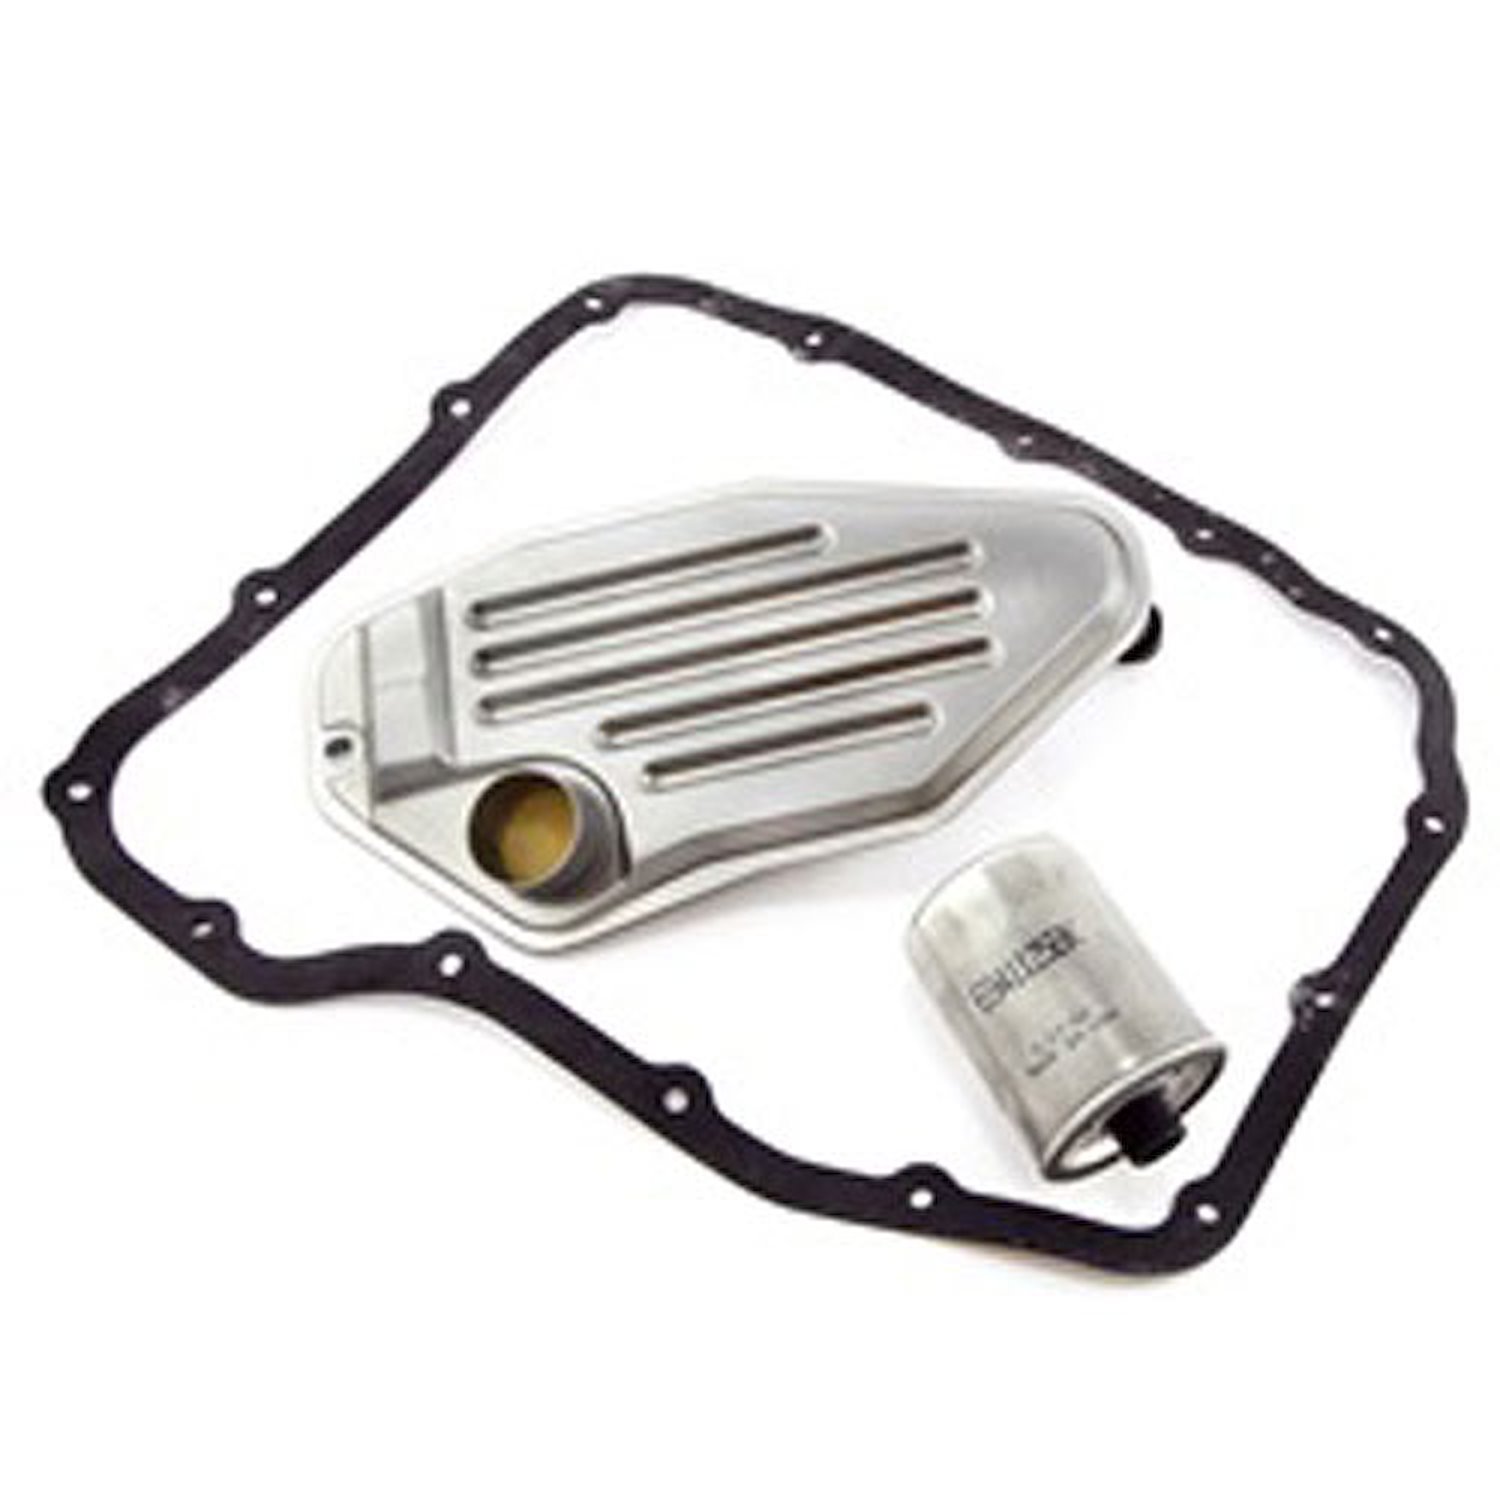 This automatic transmission filter kit from Omix-ADA fits the 42RLE transmission found in 03-06 Jeep Wranglers.